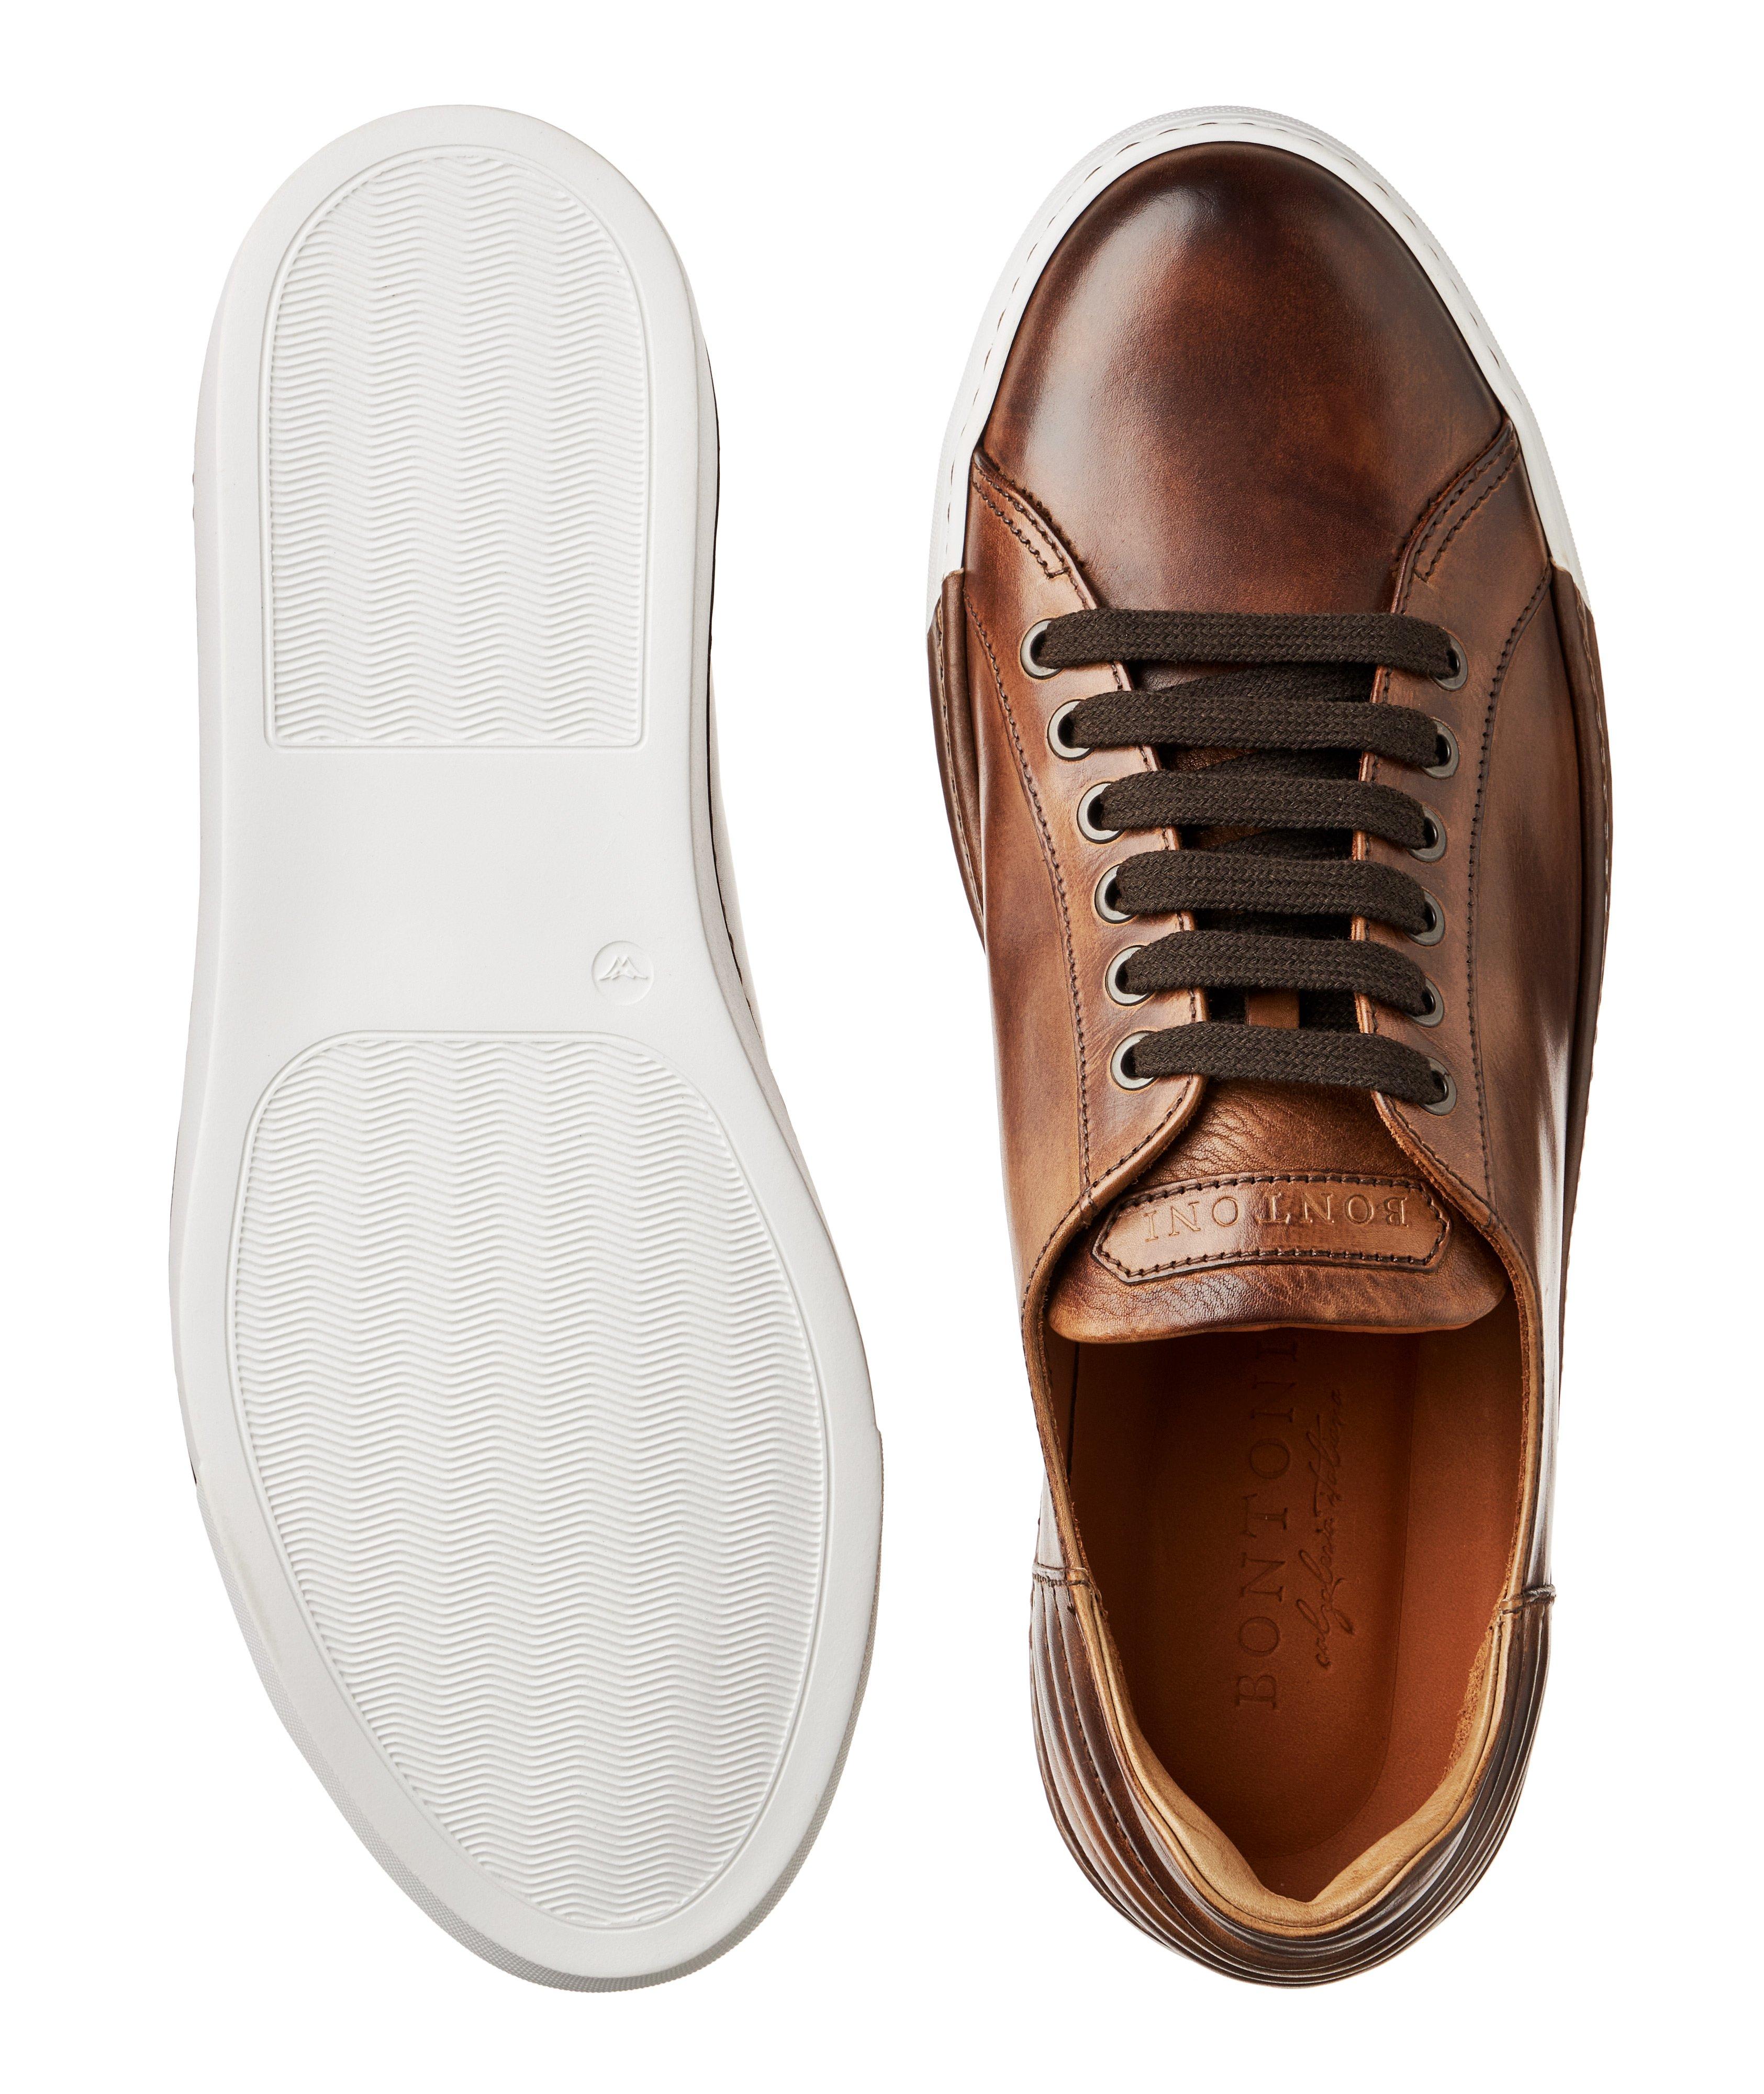 Burnished Leather Sneakers image 2